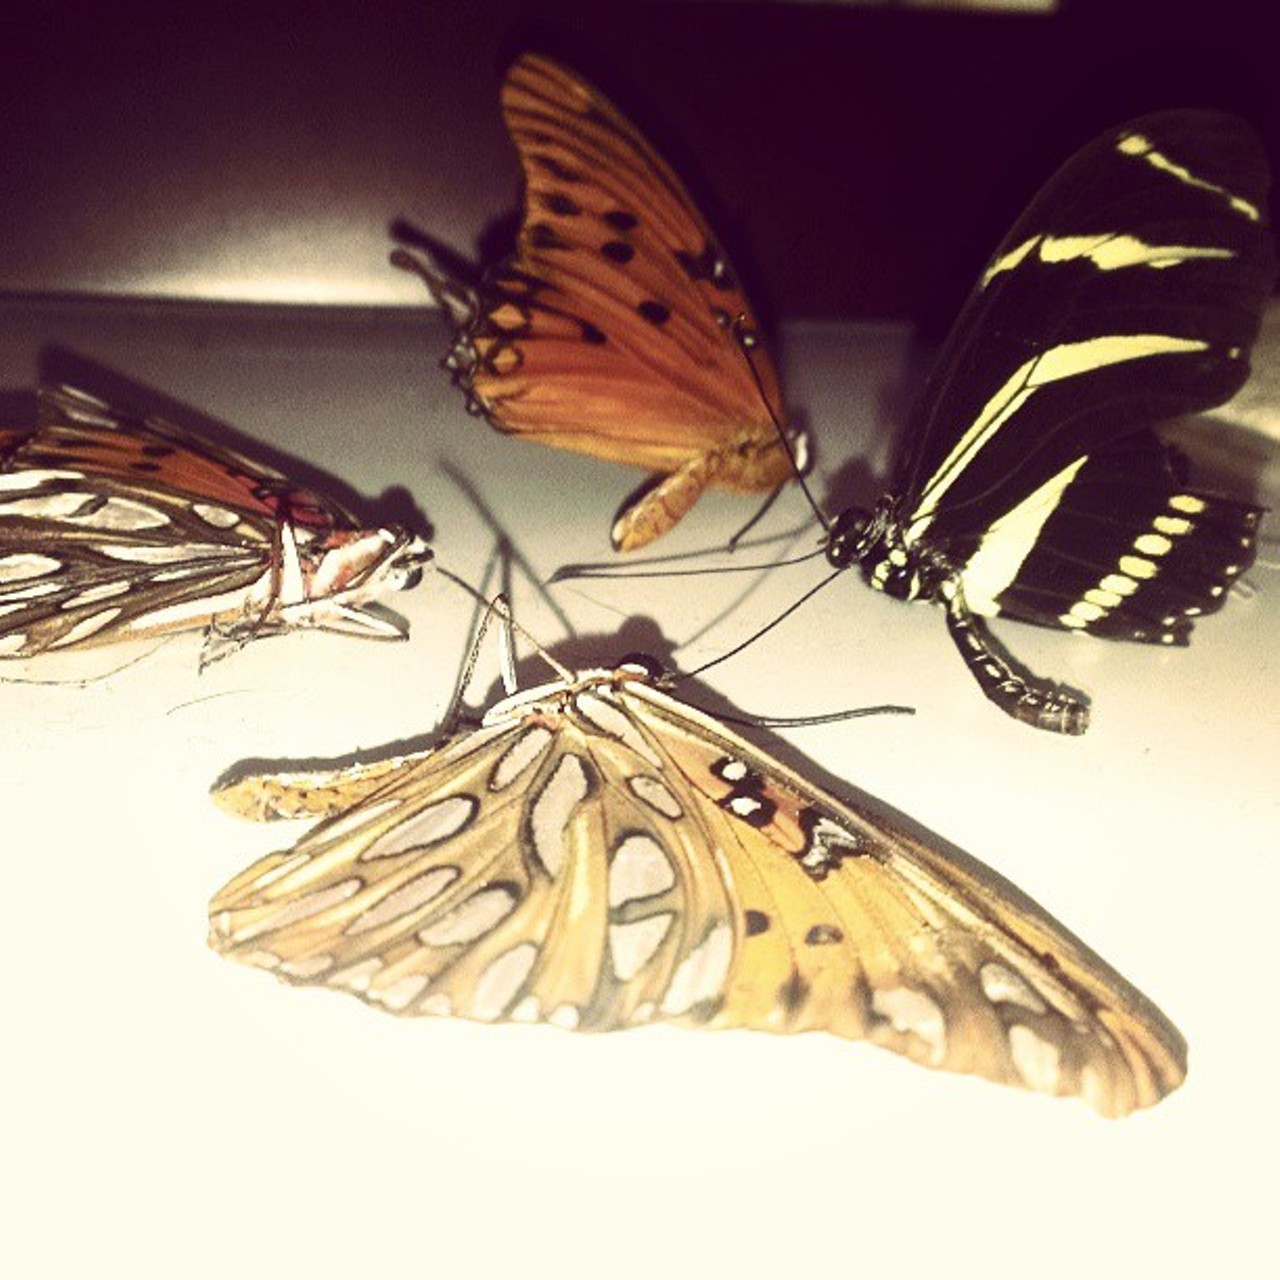 Butterfly collection?